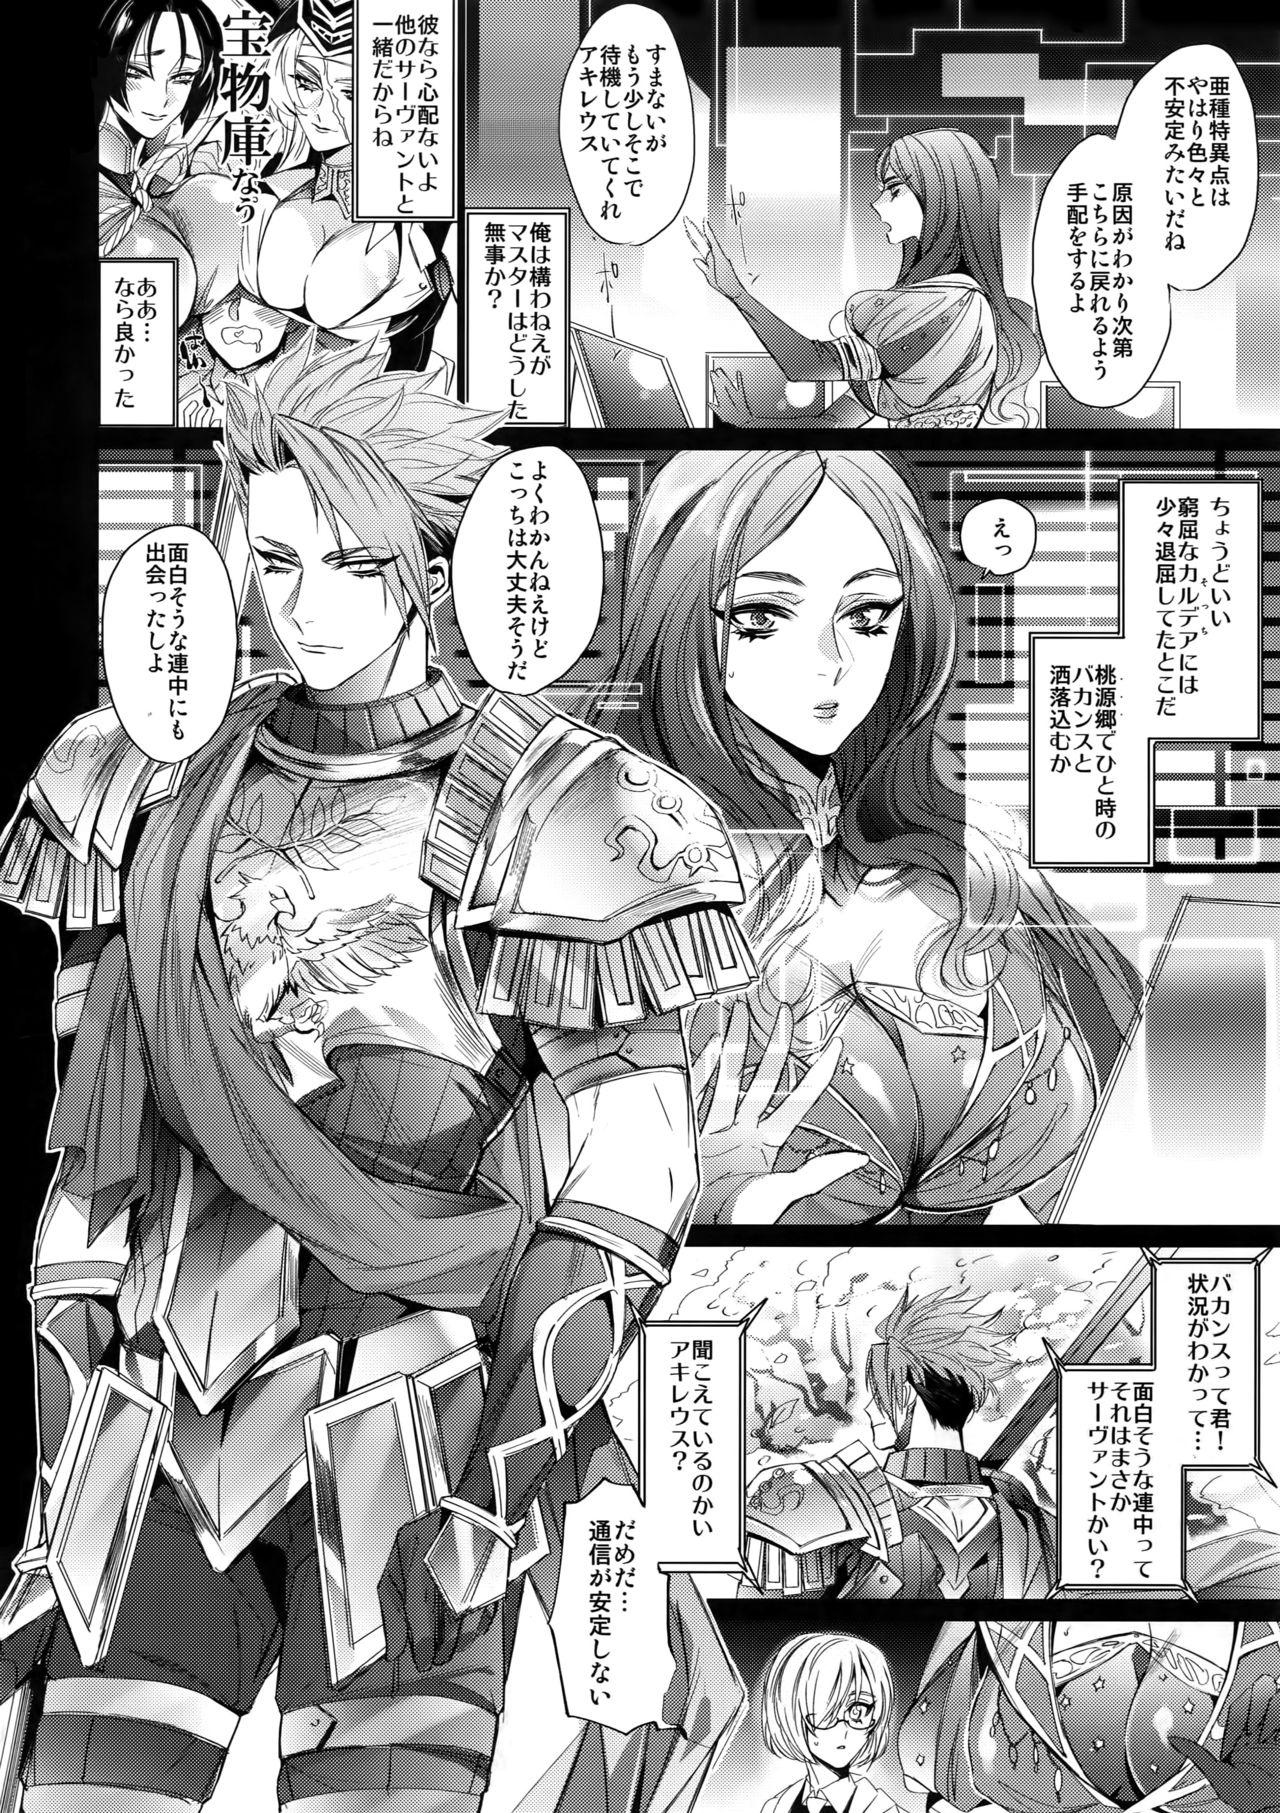 Guys From Dusk Till The End - Fate grand order Innocent - Page 3